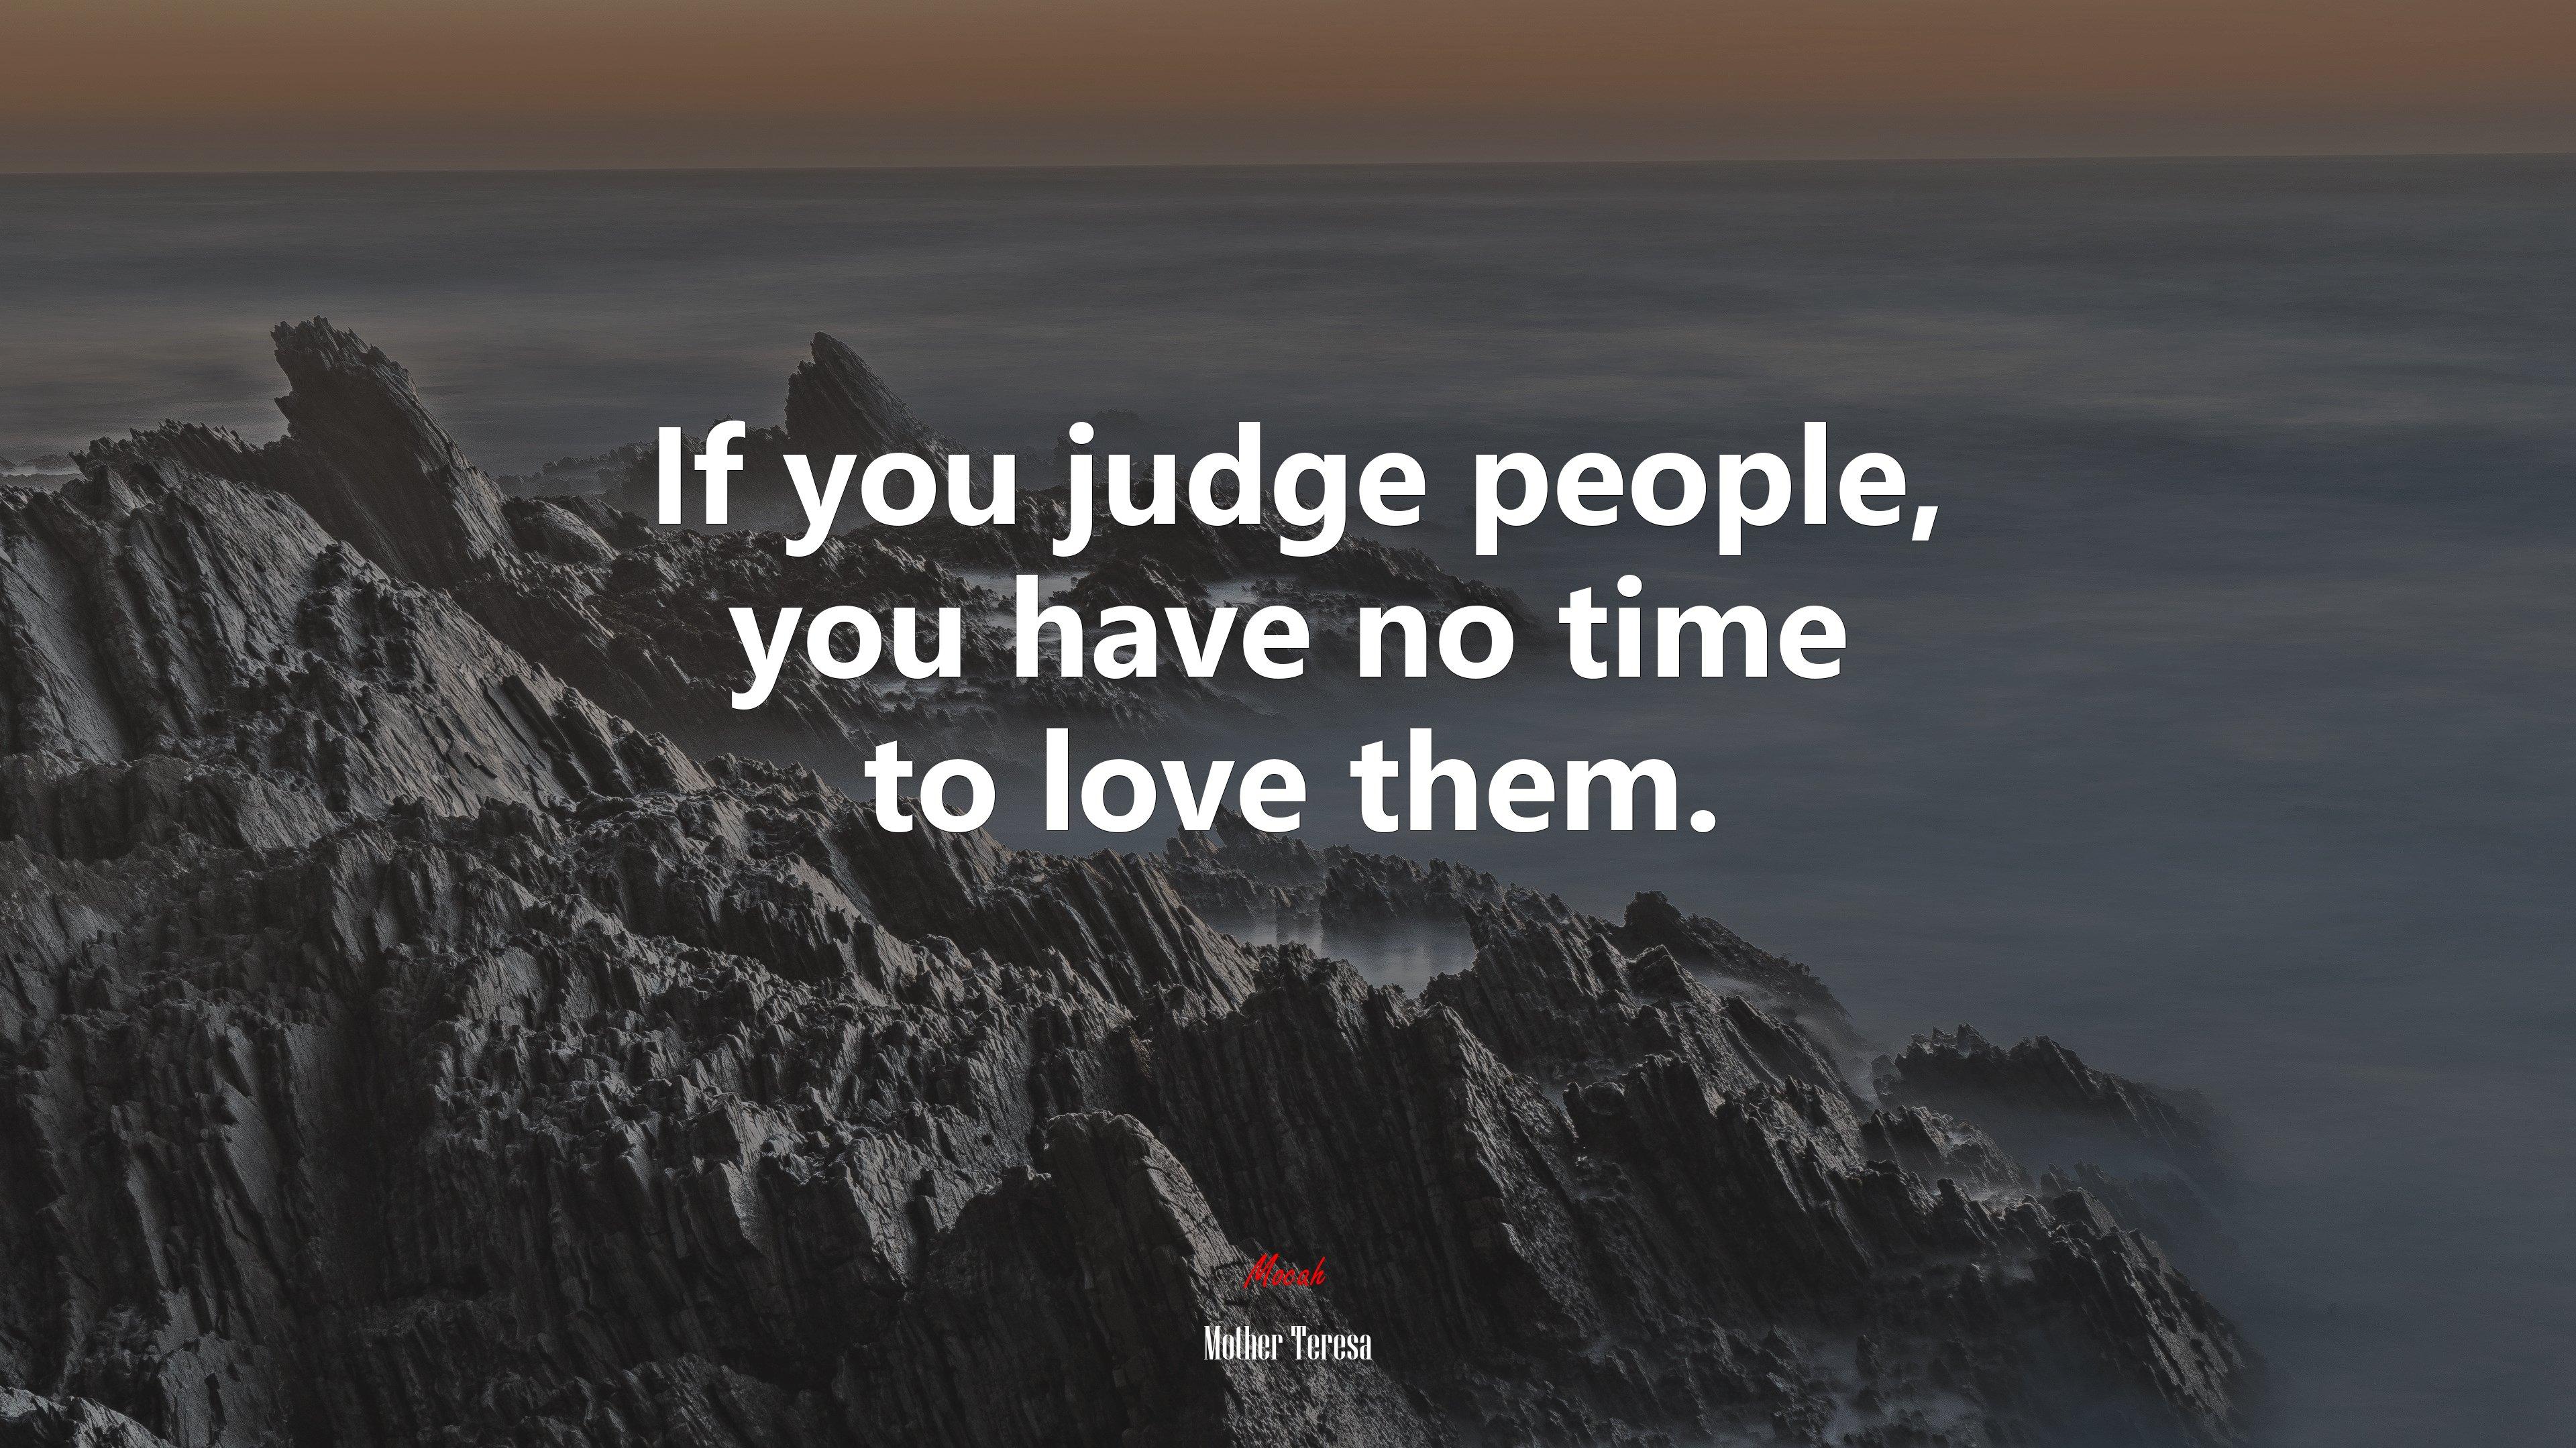 626164 If you judge people you have no time to love them